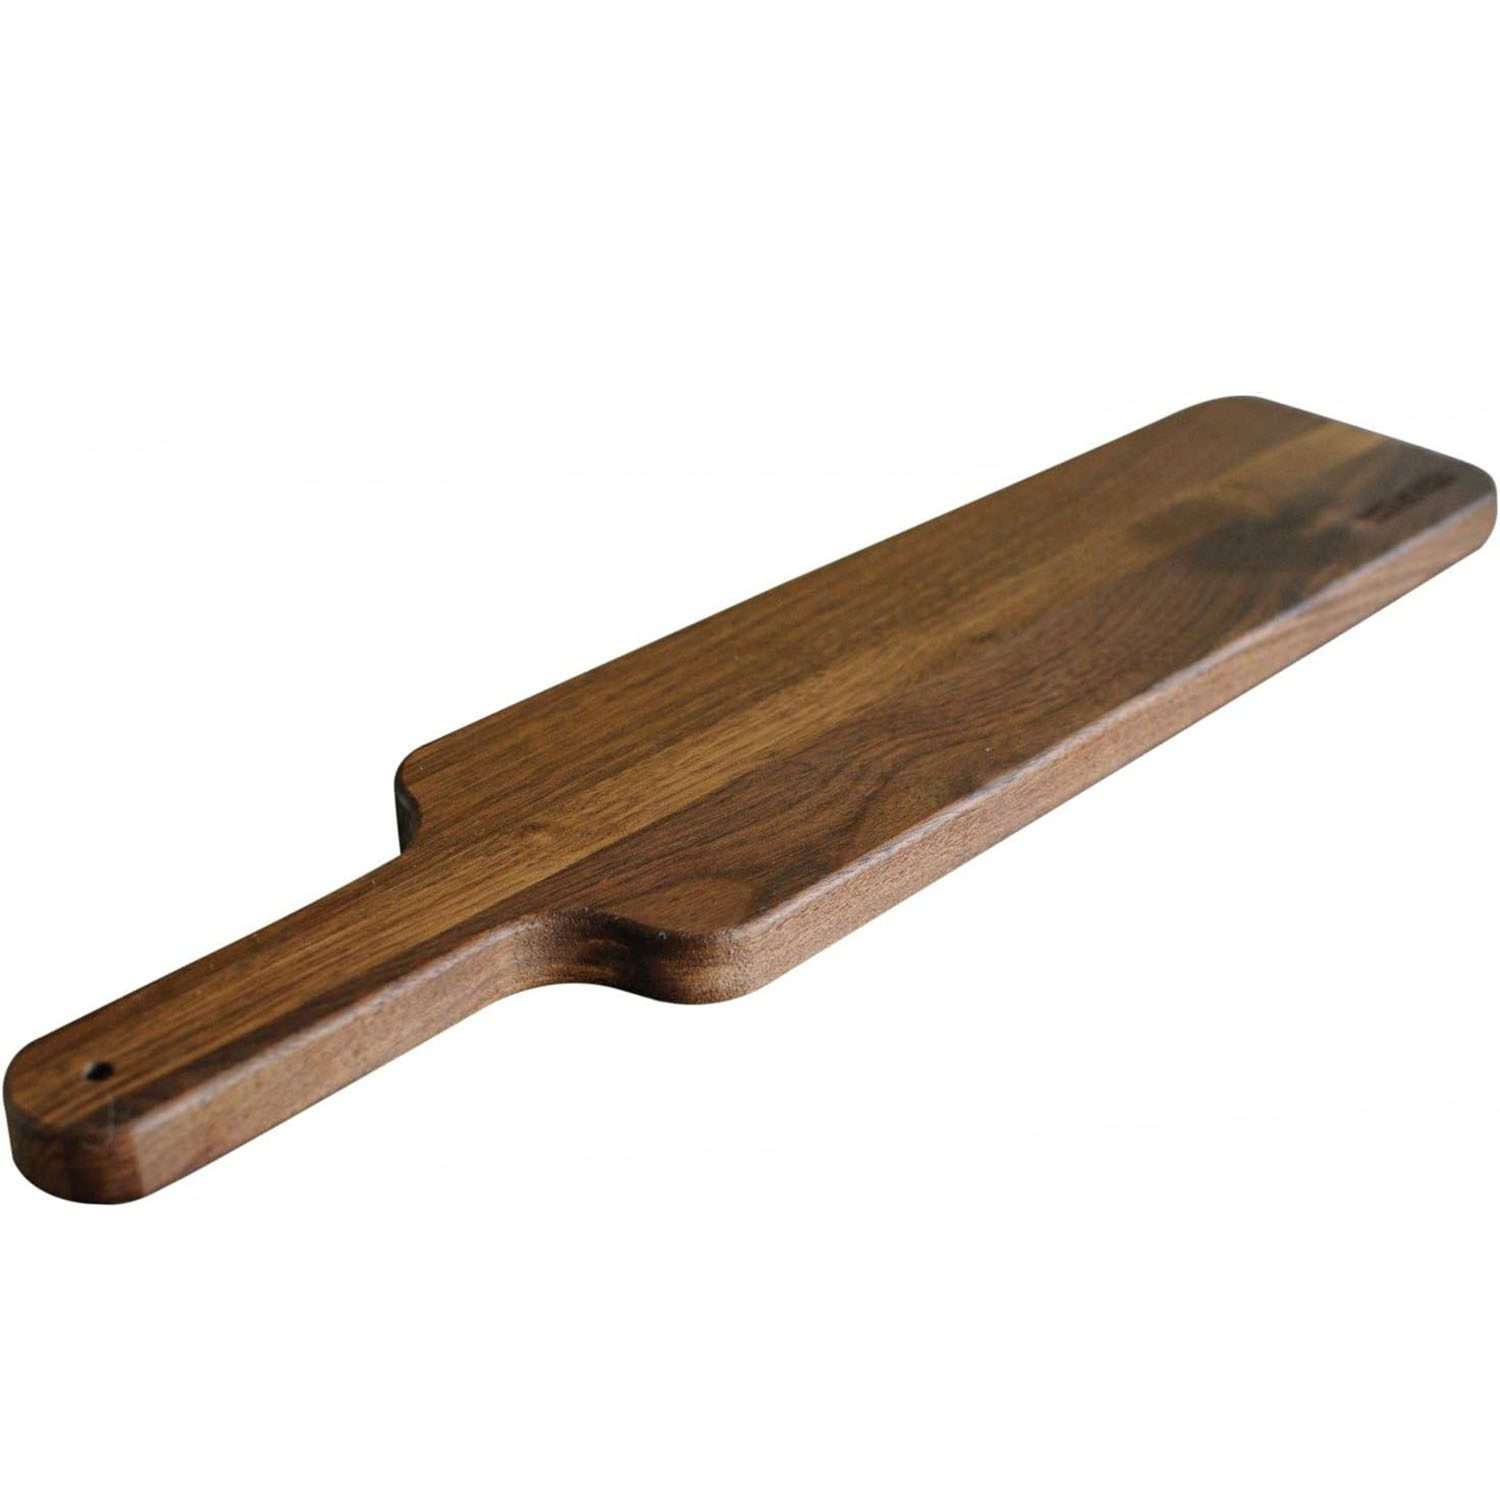 Wooden Walnut Cutting Board | Butcher Block made from Sustainable Hardwood